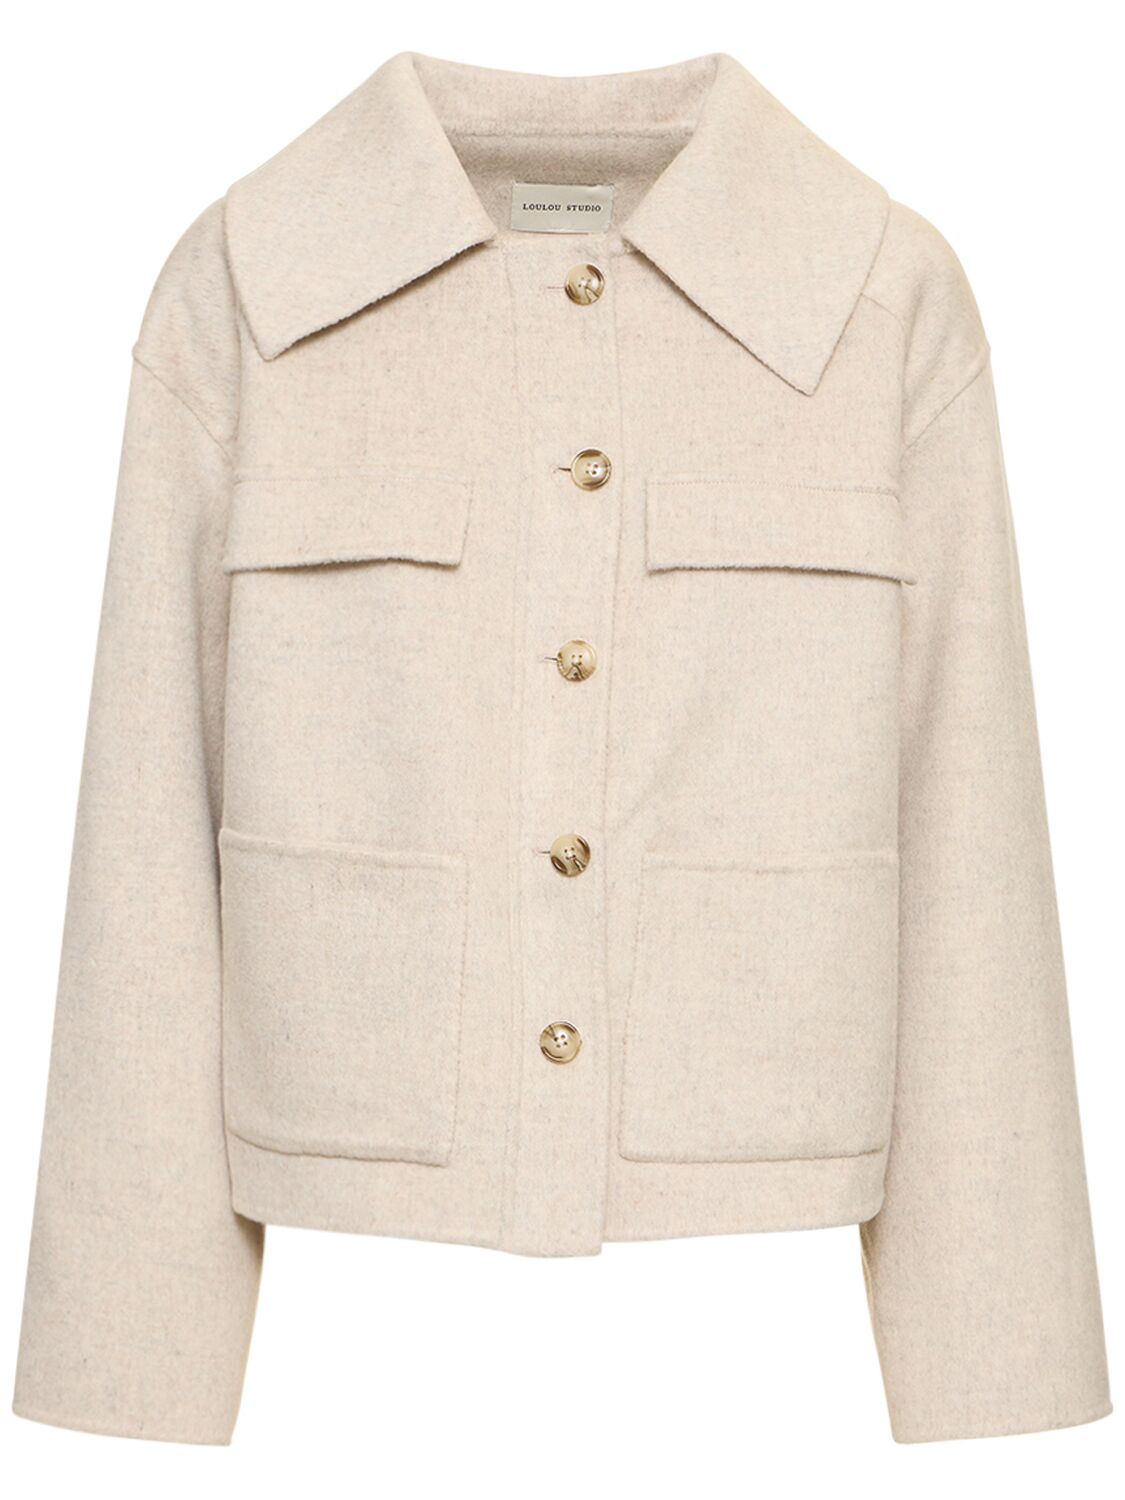 Loulou Studio Cilla Wool & Cashmere Jacket In Hafer